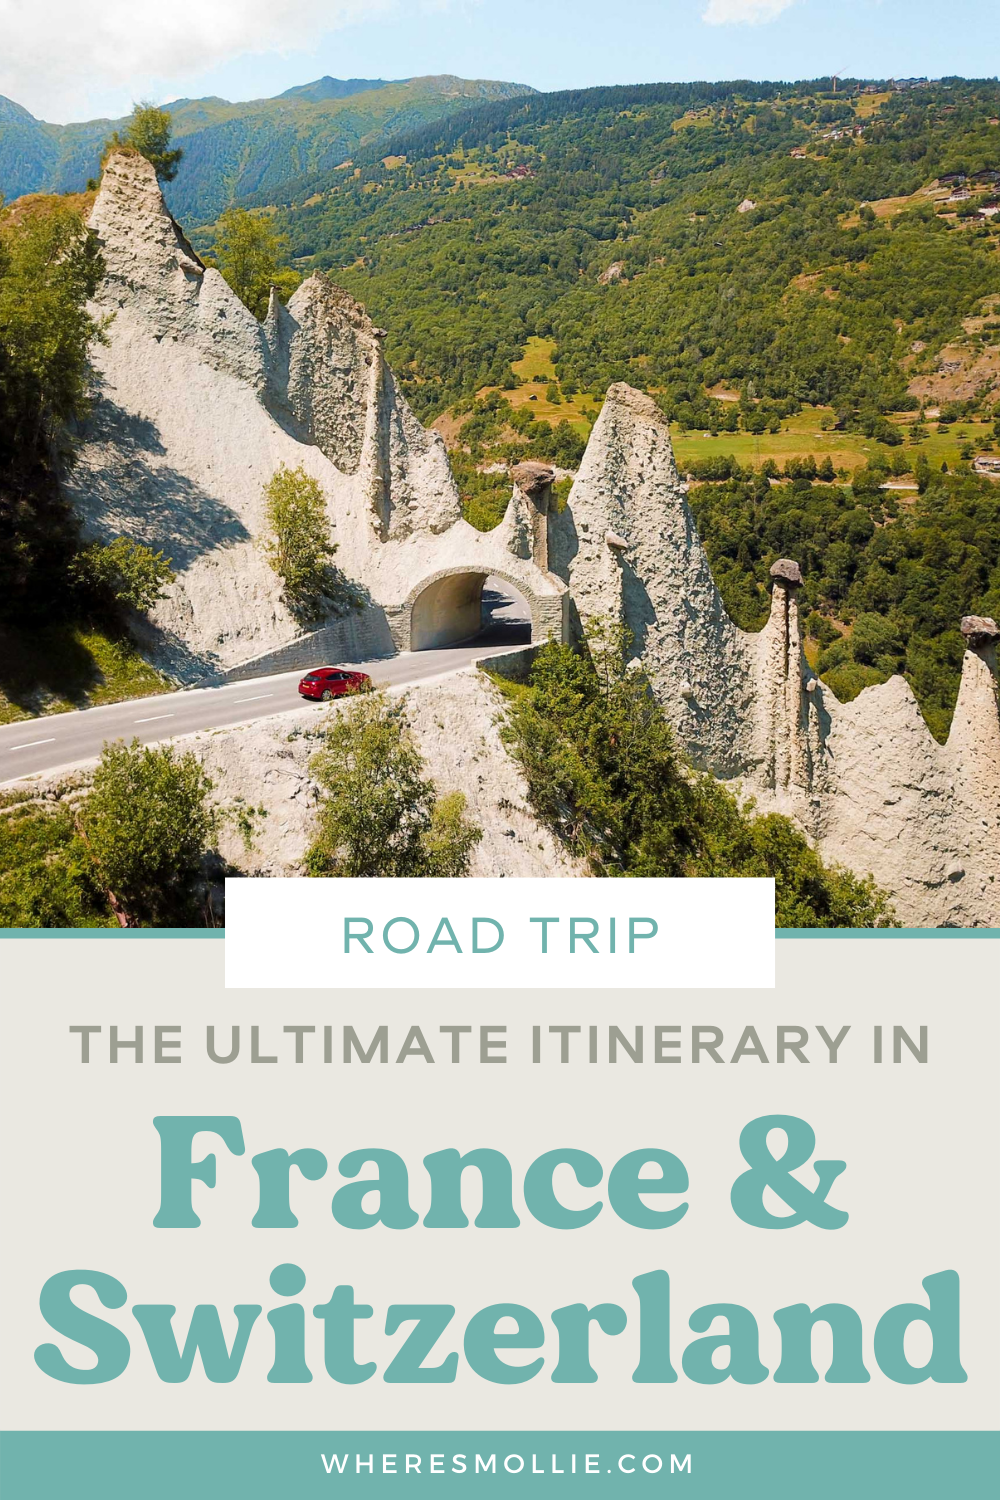 An 8-day itinerary through France & Switzerland